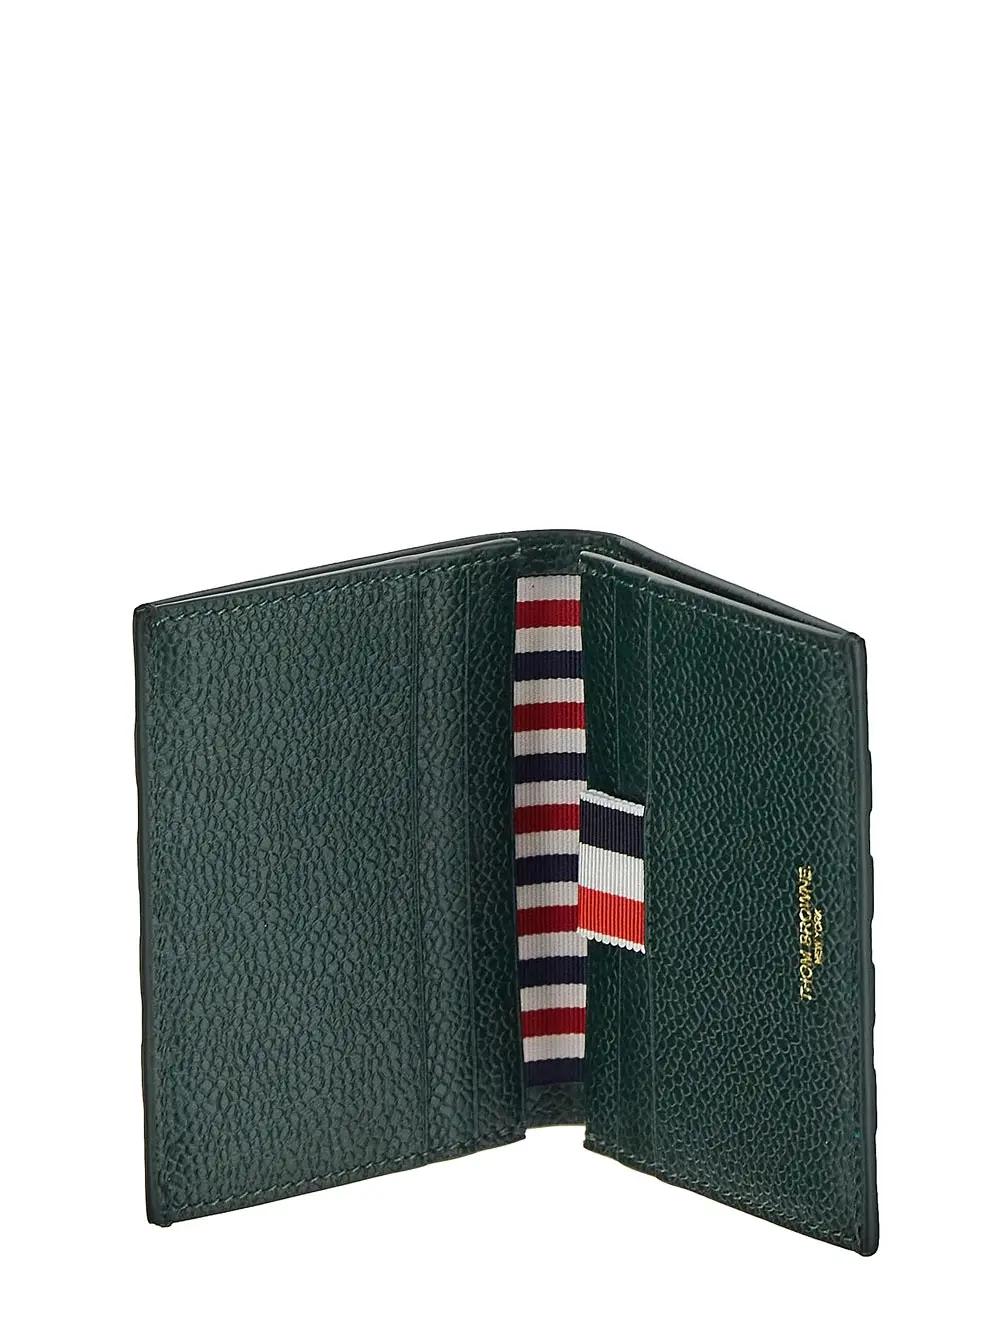 Thom Browne Double Cardholder